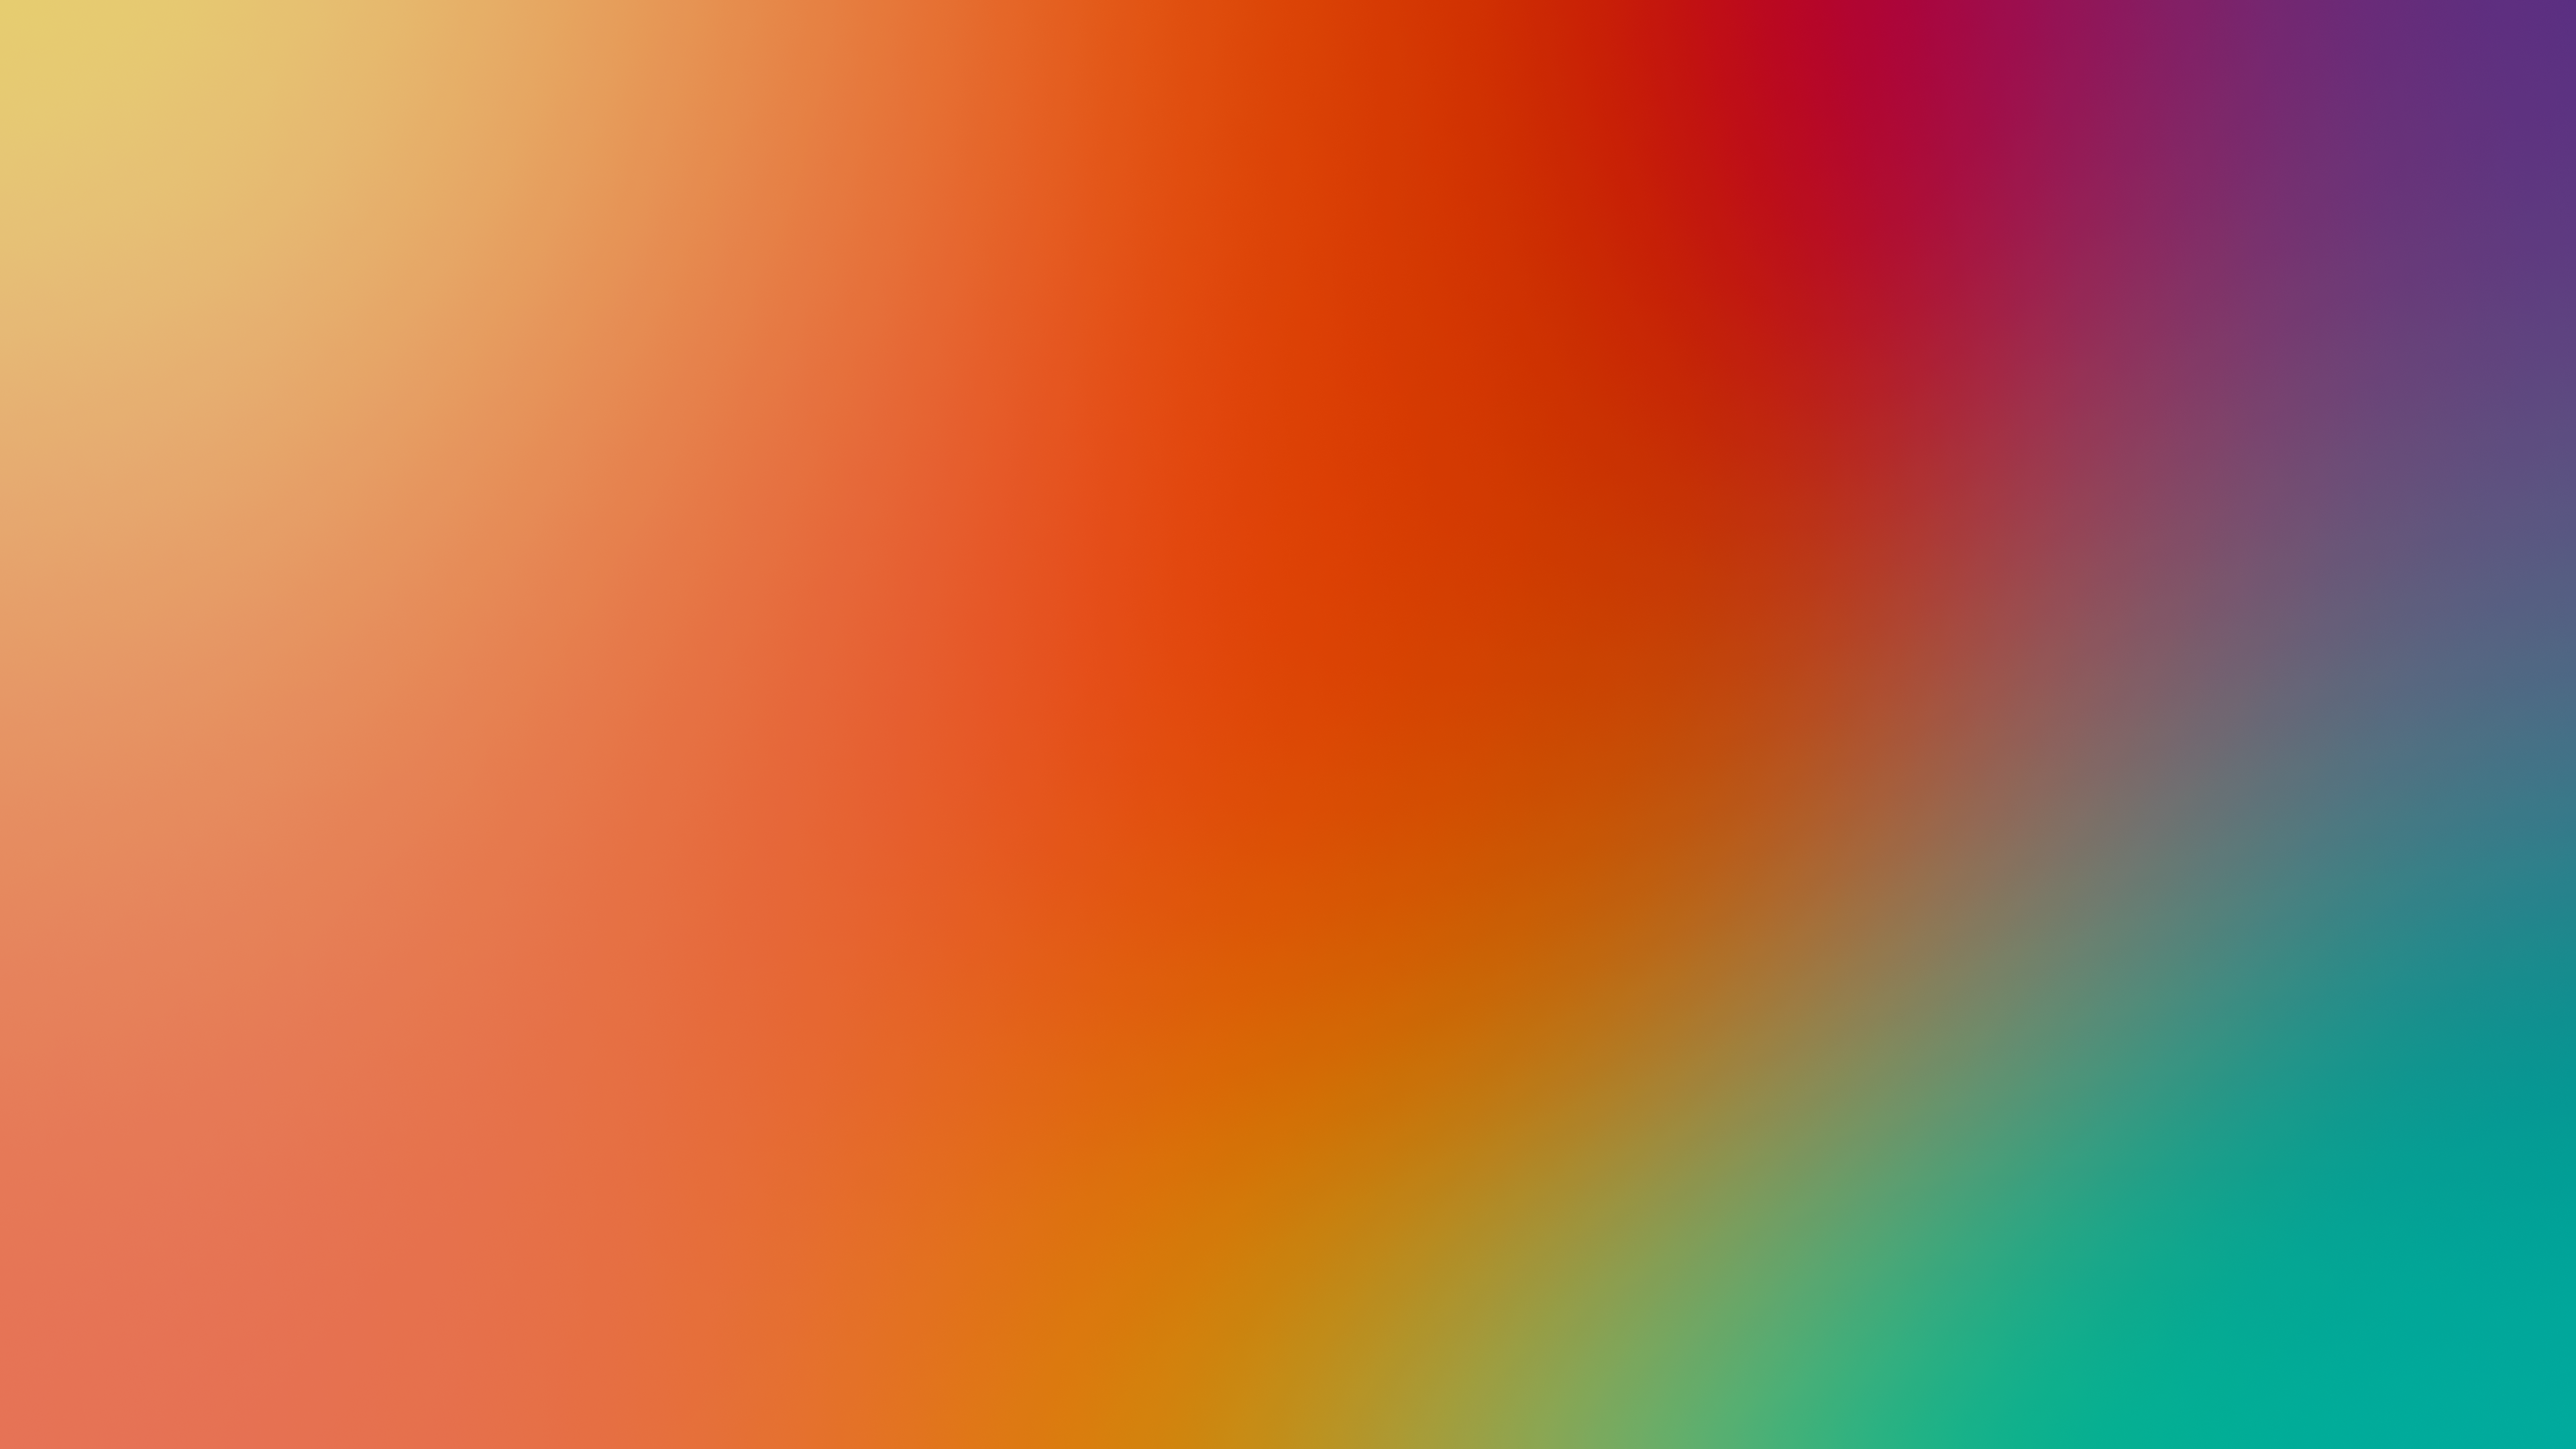 General 3840x2160 colorful blurred abstract minimalism